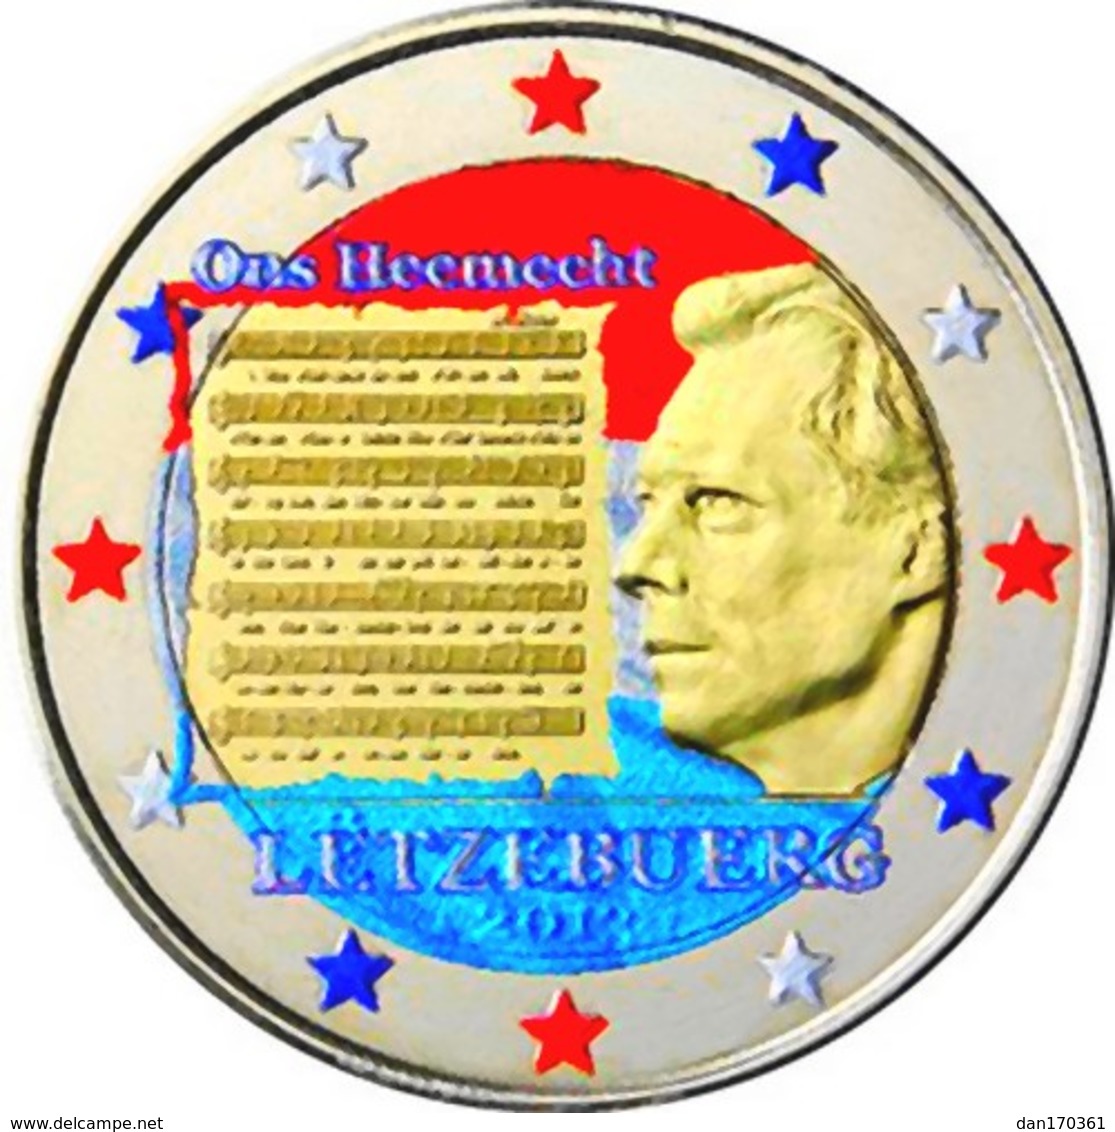 LUXEMBOURG 2013 - 2 EUROS - HYMNE - COULEUR - FARBE - Luxemburg